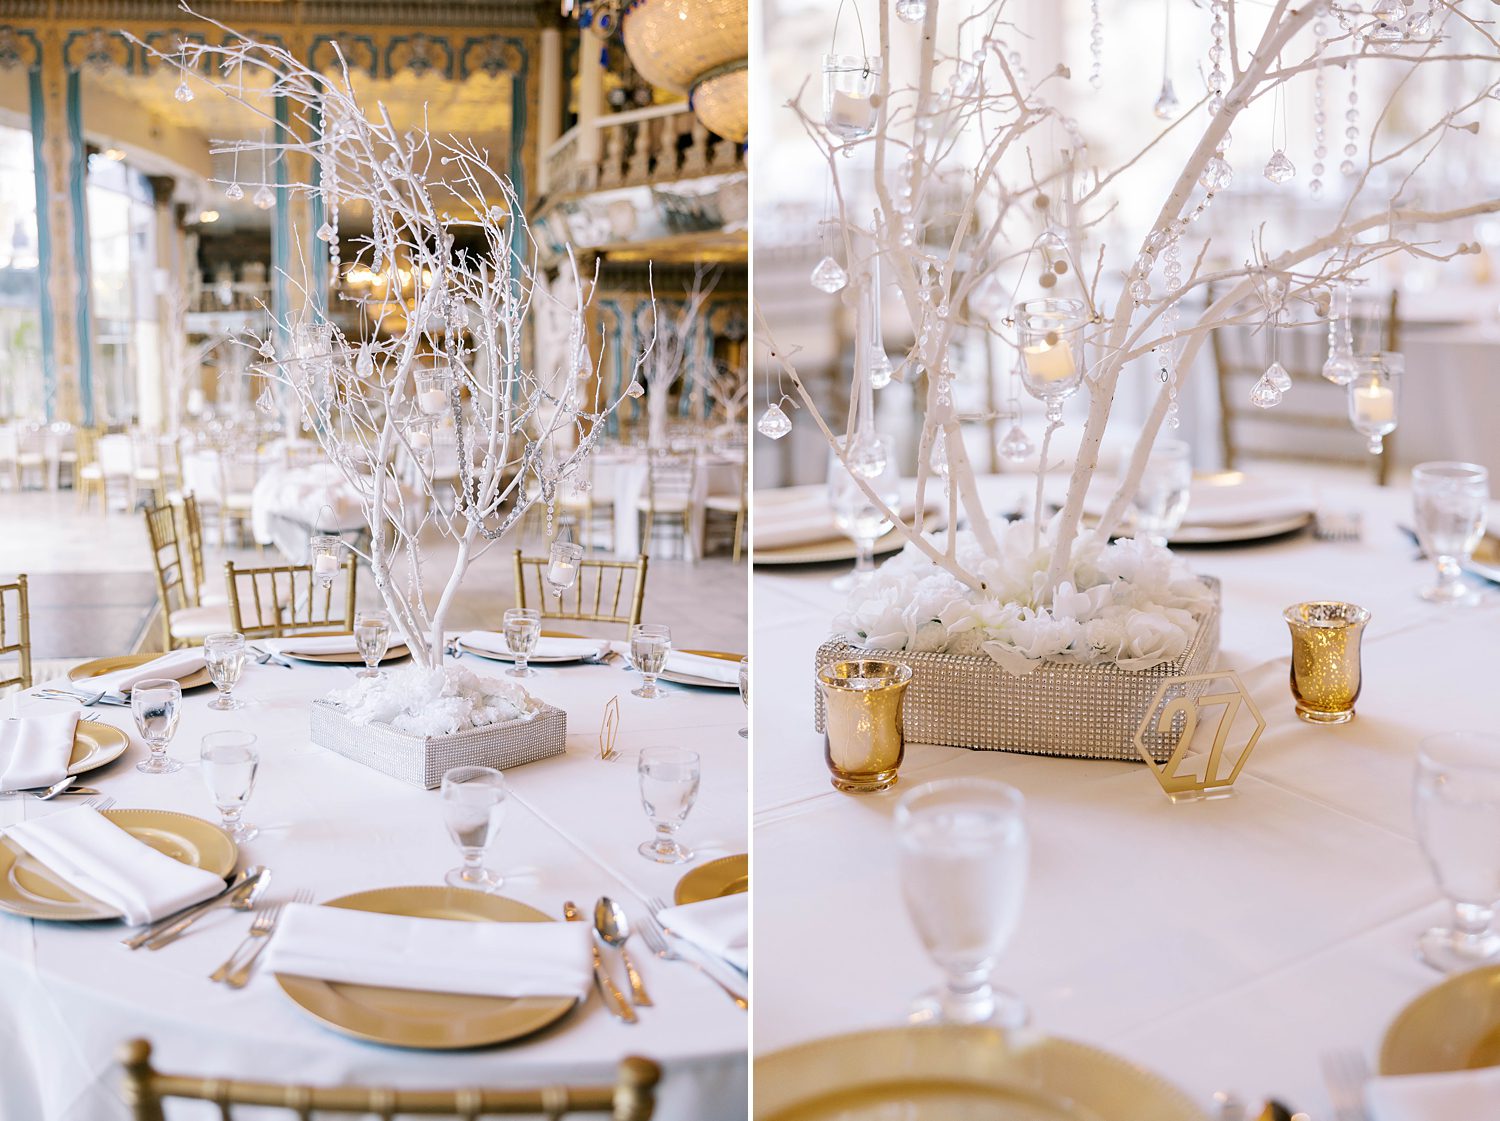 wedding reception centerpieces inspired by winter trees